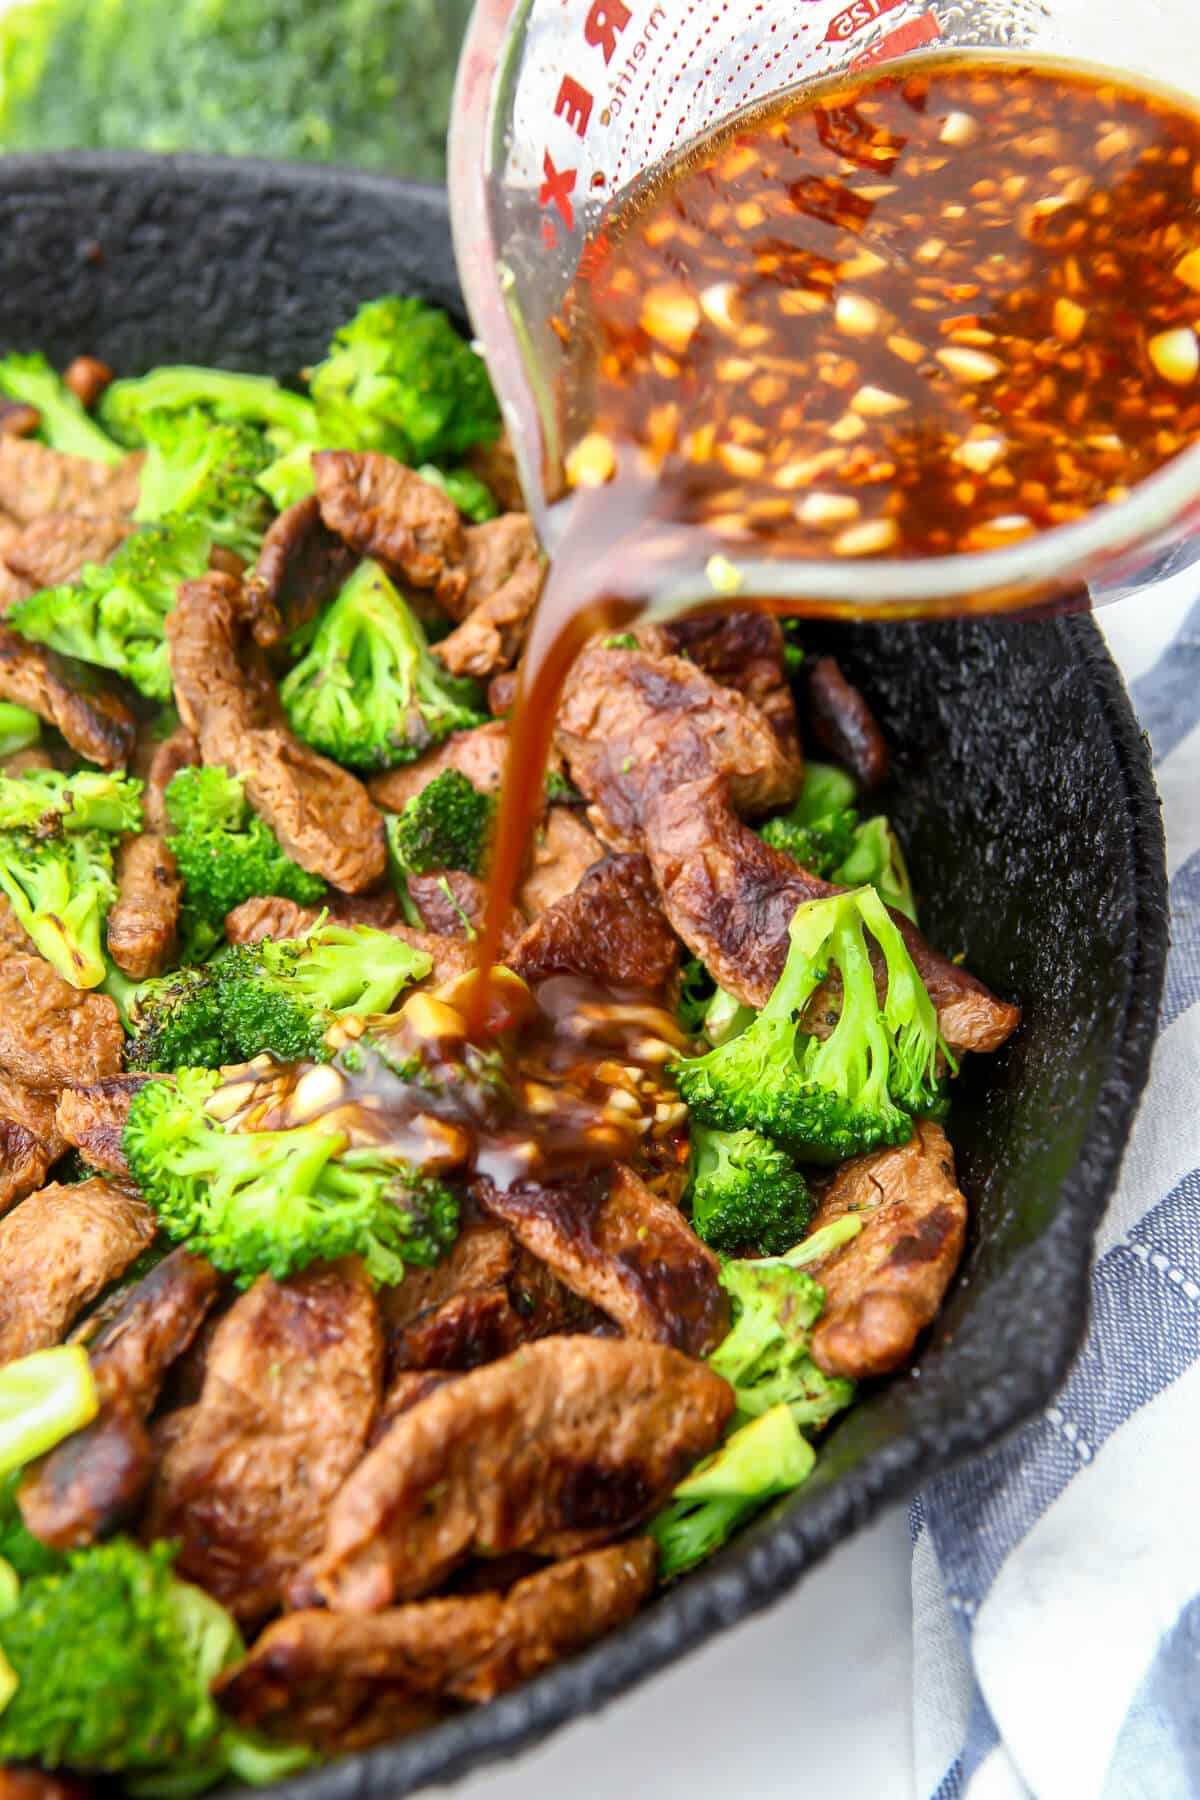 Stir fry sauce being poured over vegan beef strips cooked with broccoli.